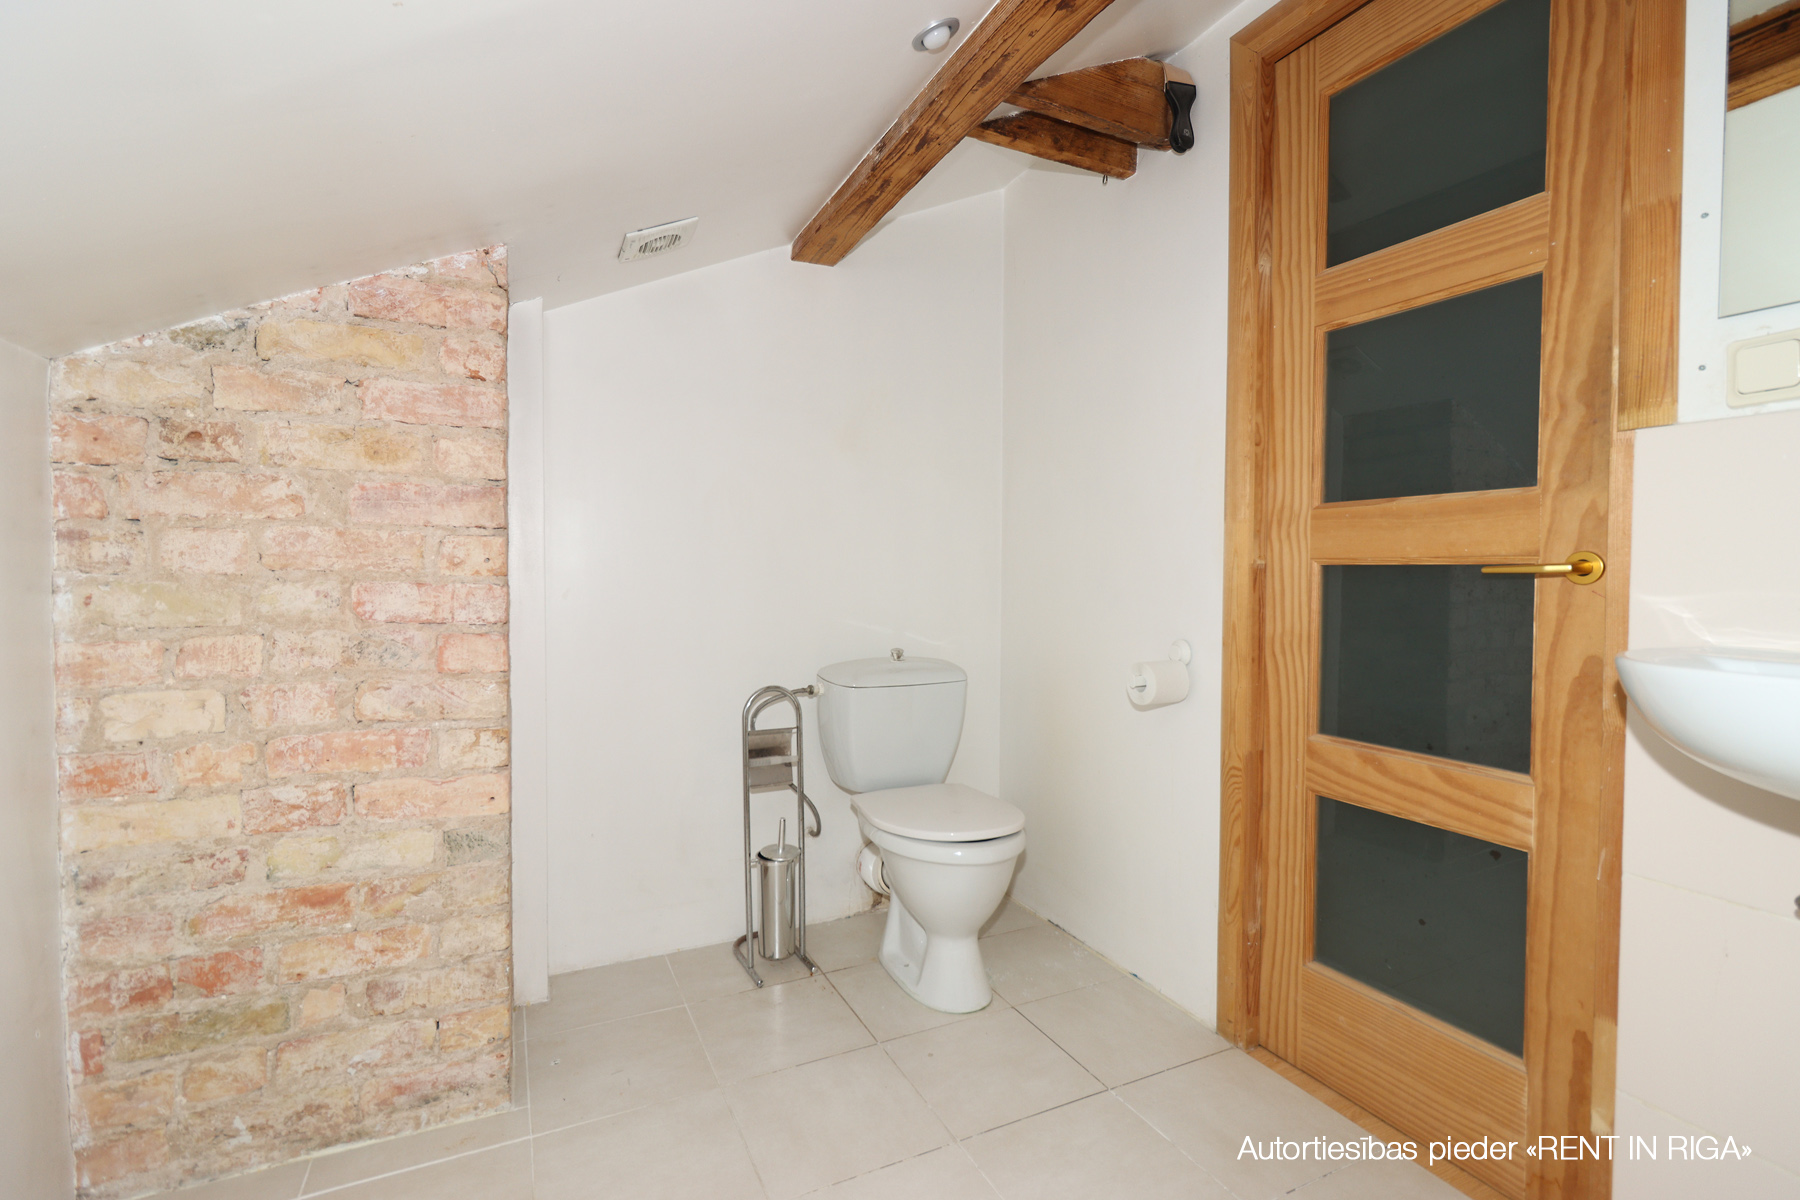 Apartment for rent, Stabu street 2 - Image 1